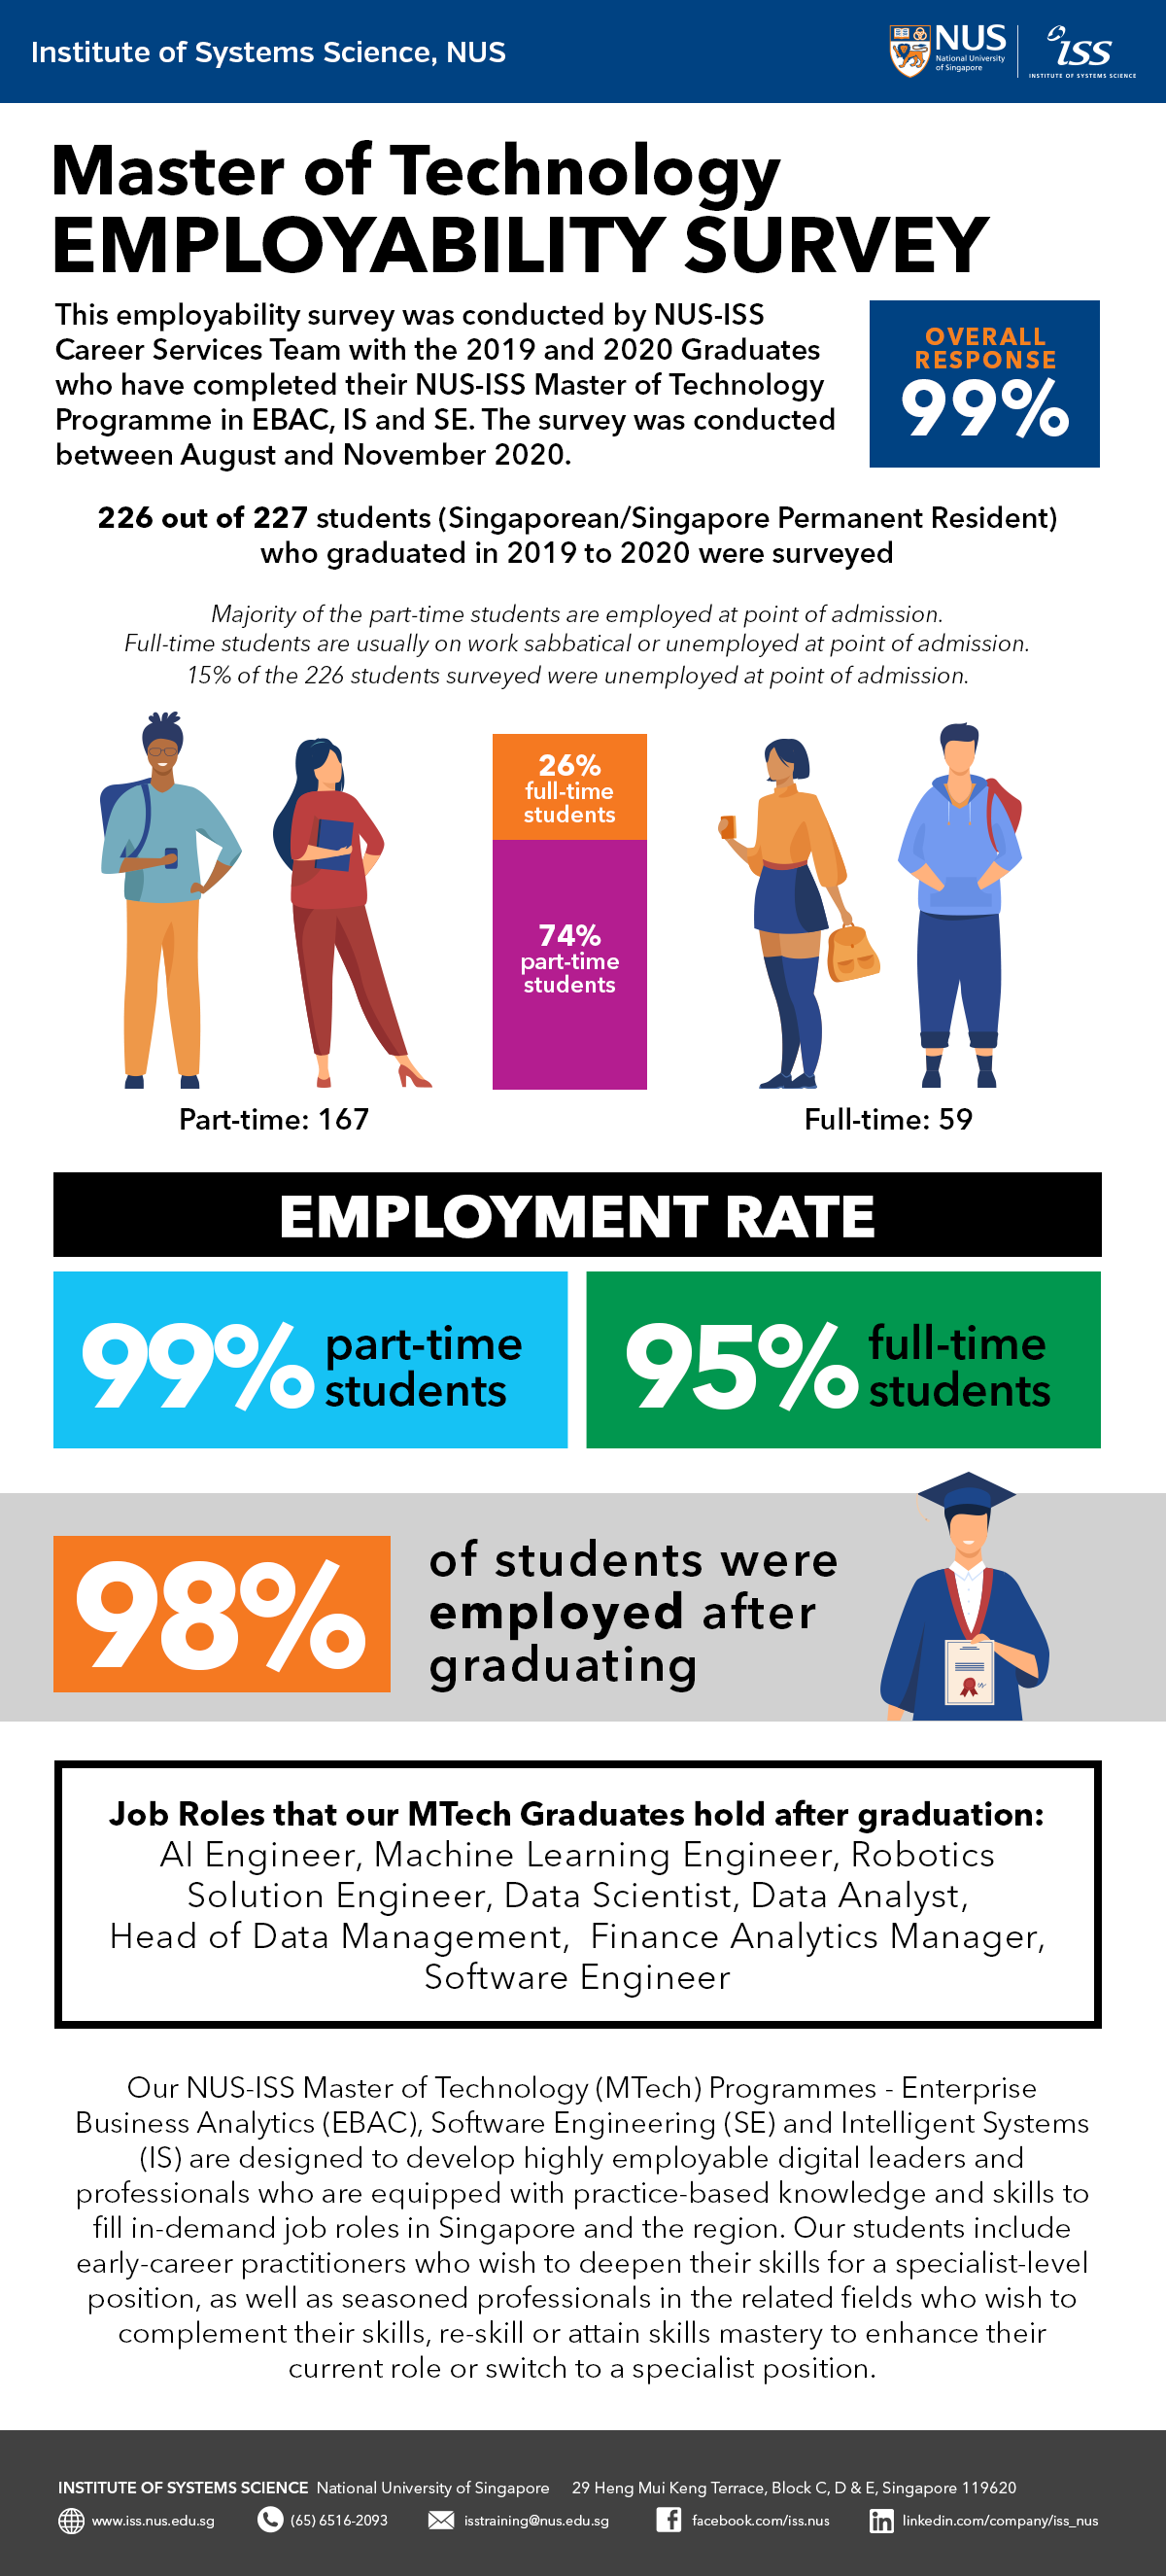 nus-iss-mtech-graduands-see-healthy-employment-rate-in-latest-employability-study